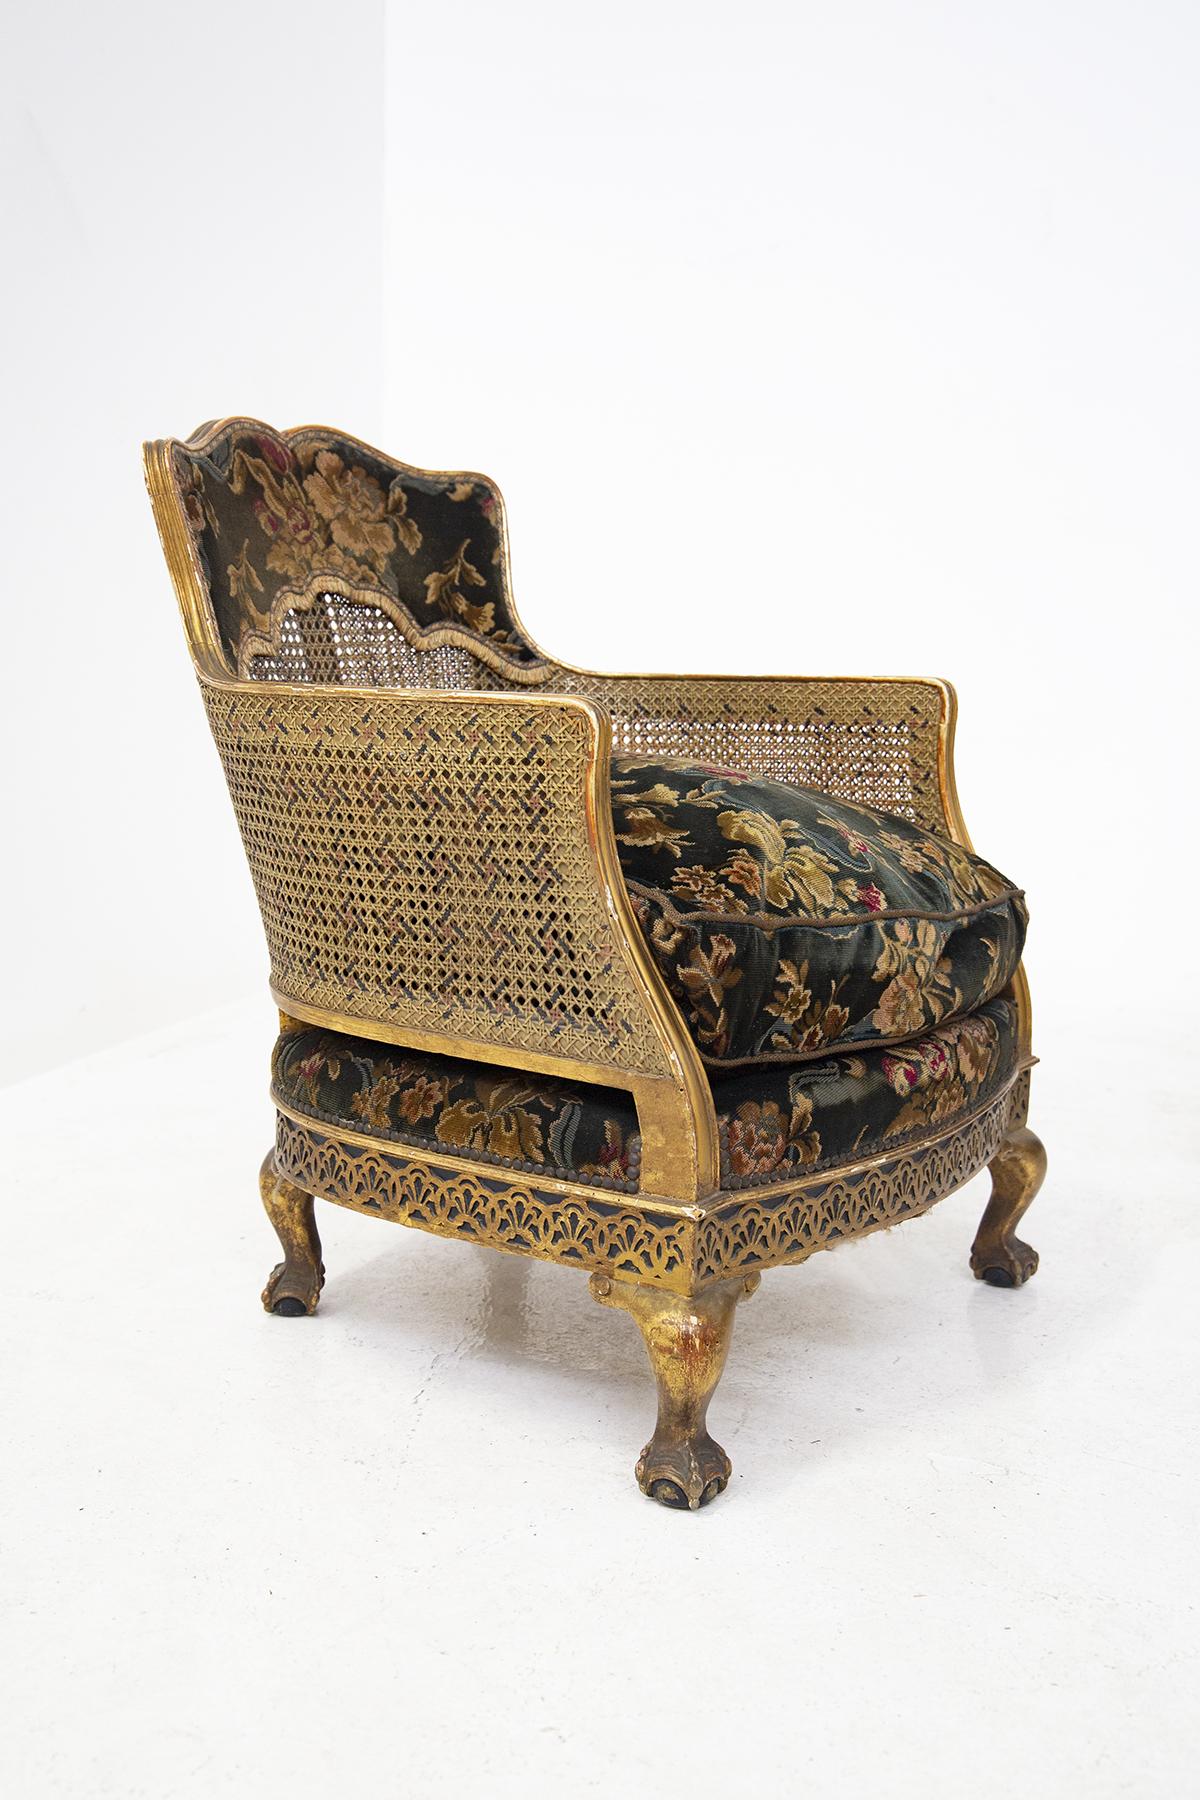 Splendid pair of armchairs designed at the end of 1800, of fine French manufacture.
The armchairs are in oriental style as you can see from the sinuous and curved shapes and woven design.
The armchairs have sinuous shapes, thanks to the fine